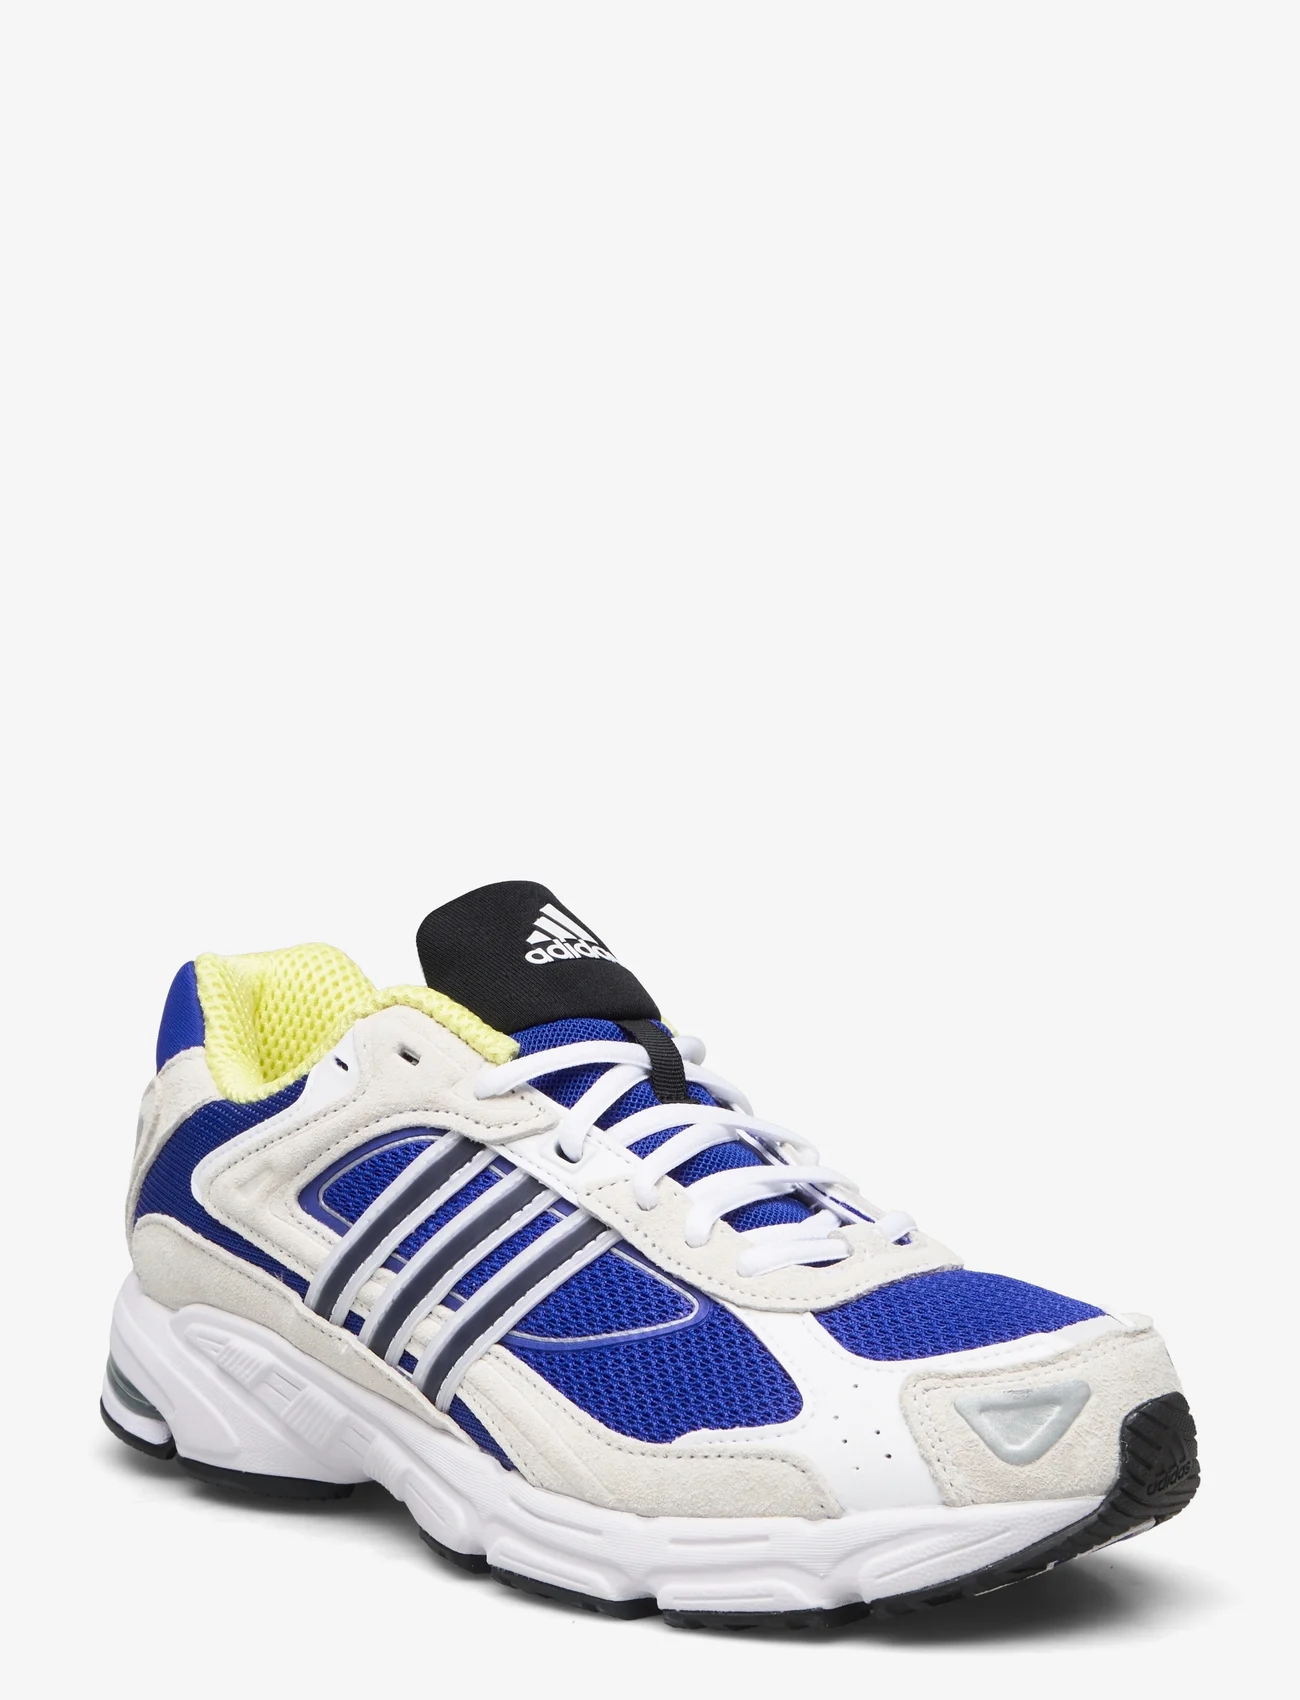 adidas Originals - Response CL Shoes - chunky sneakers - ftwwht/cblack/lucblu - 0